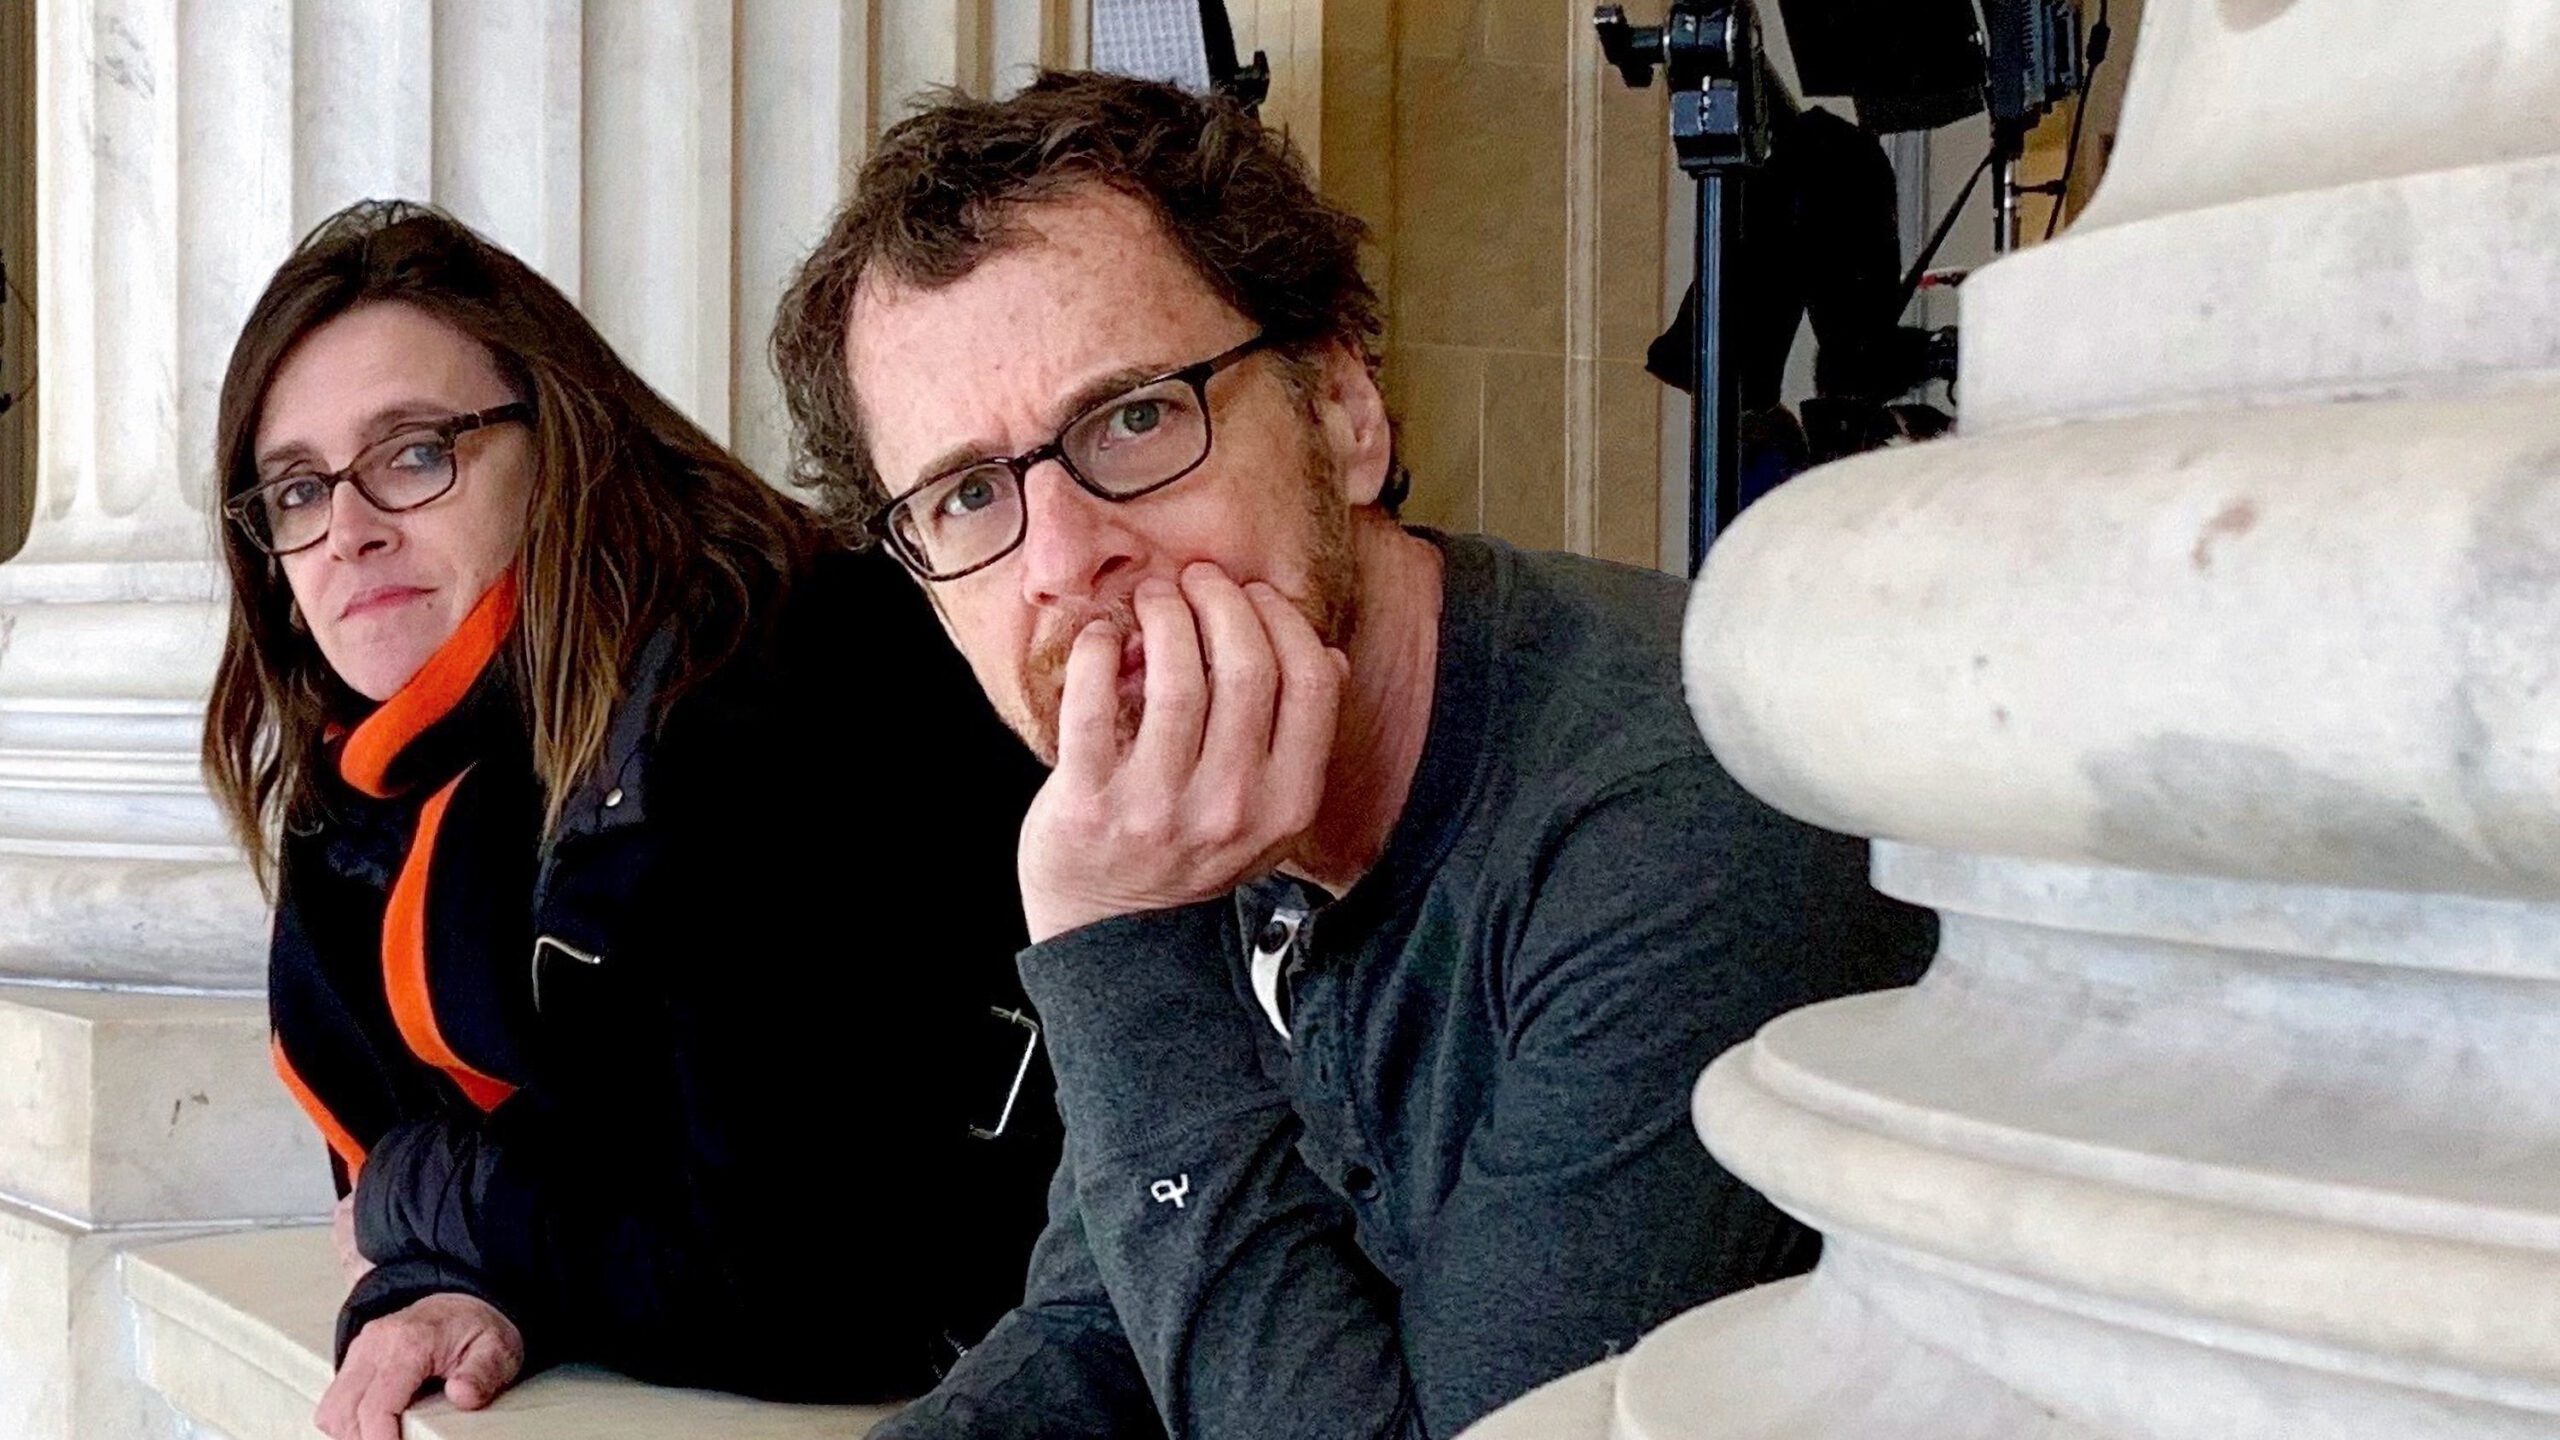 Tricia Cooke and Ethan Coen on the set of 